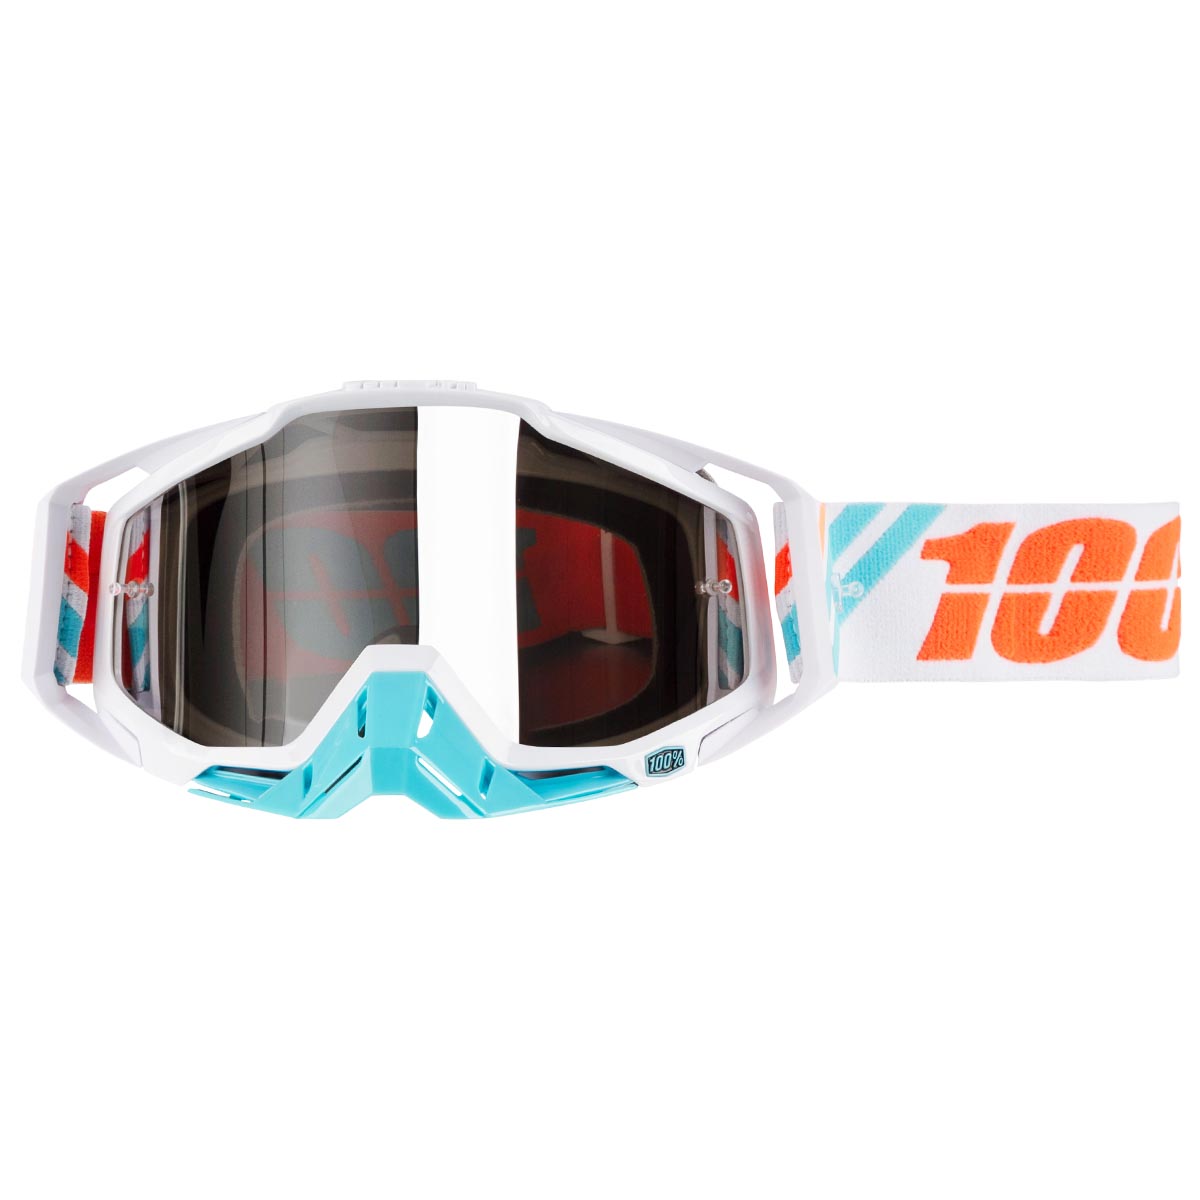 100% Goggle The Racecraft Calculus Ice - Tinted Silver Anti-Fog